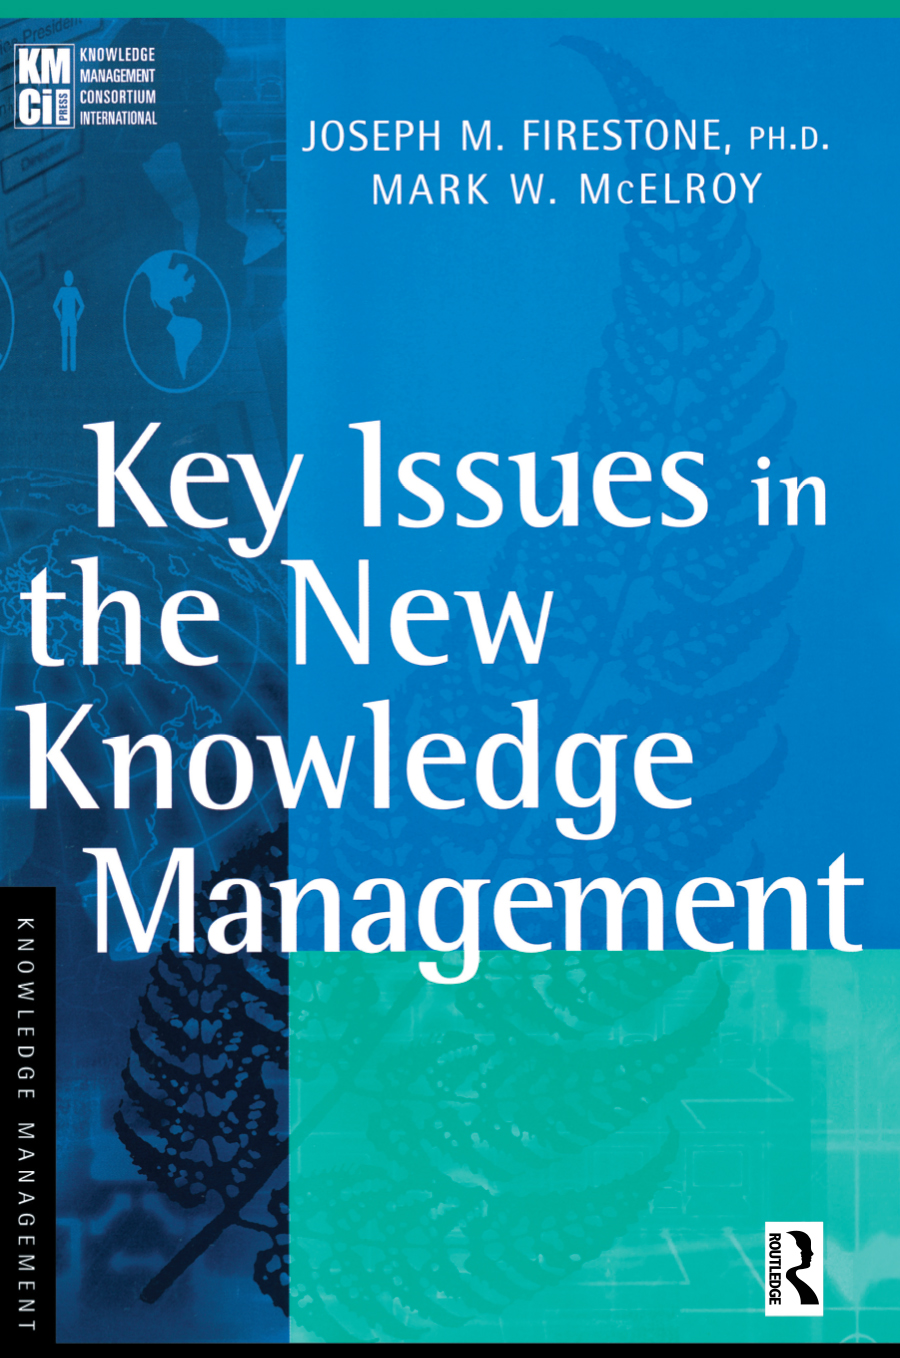 Key Issues in the New Knowledge Management - Joseph M. Firestone, Mark W. McElroy,,